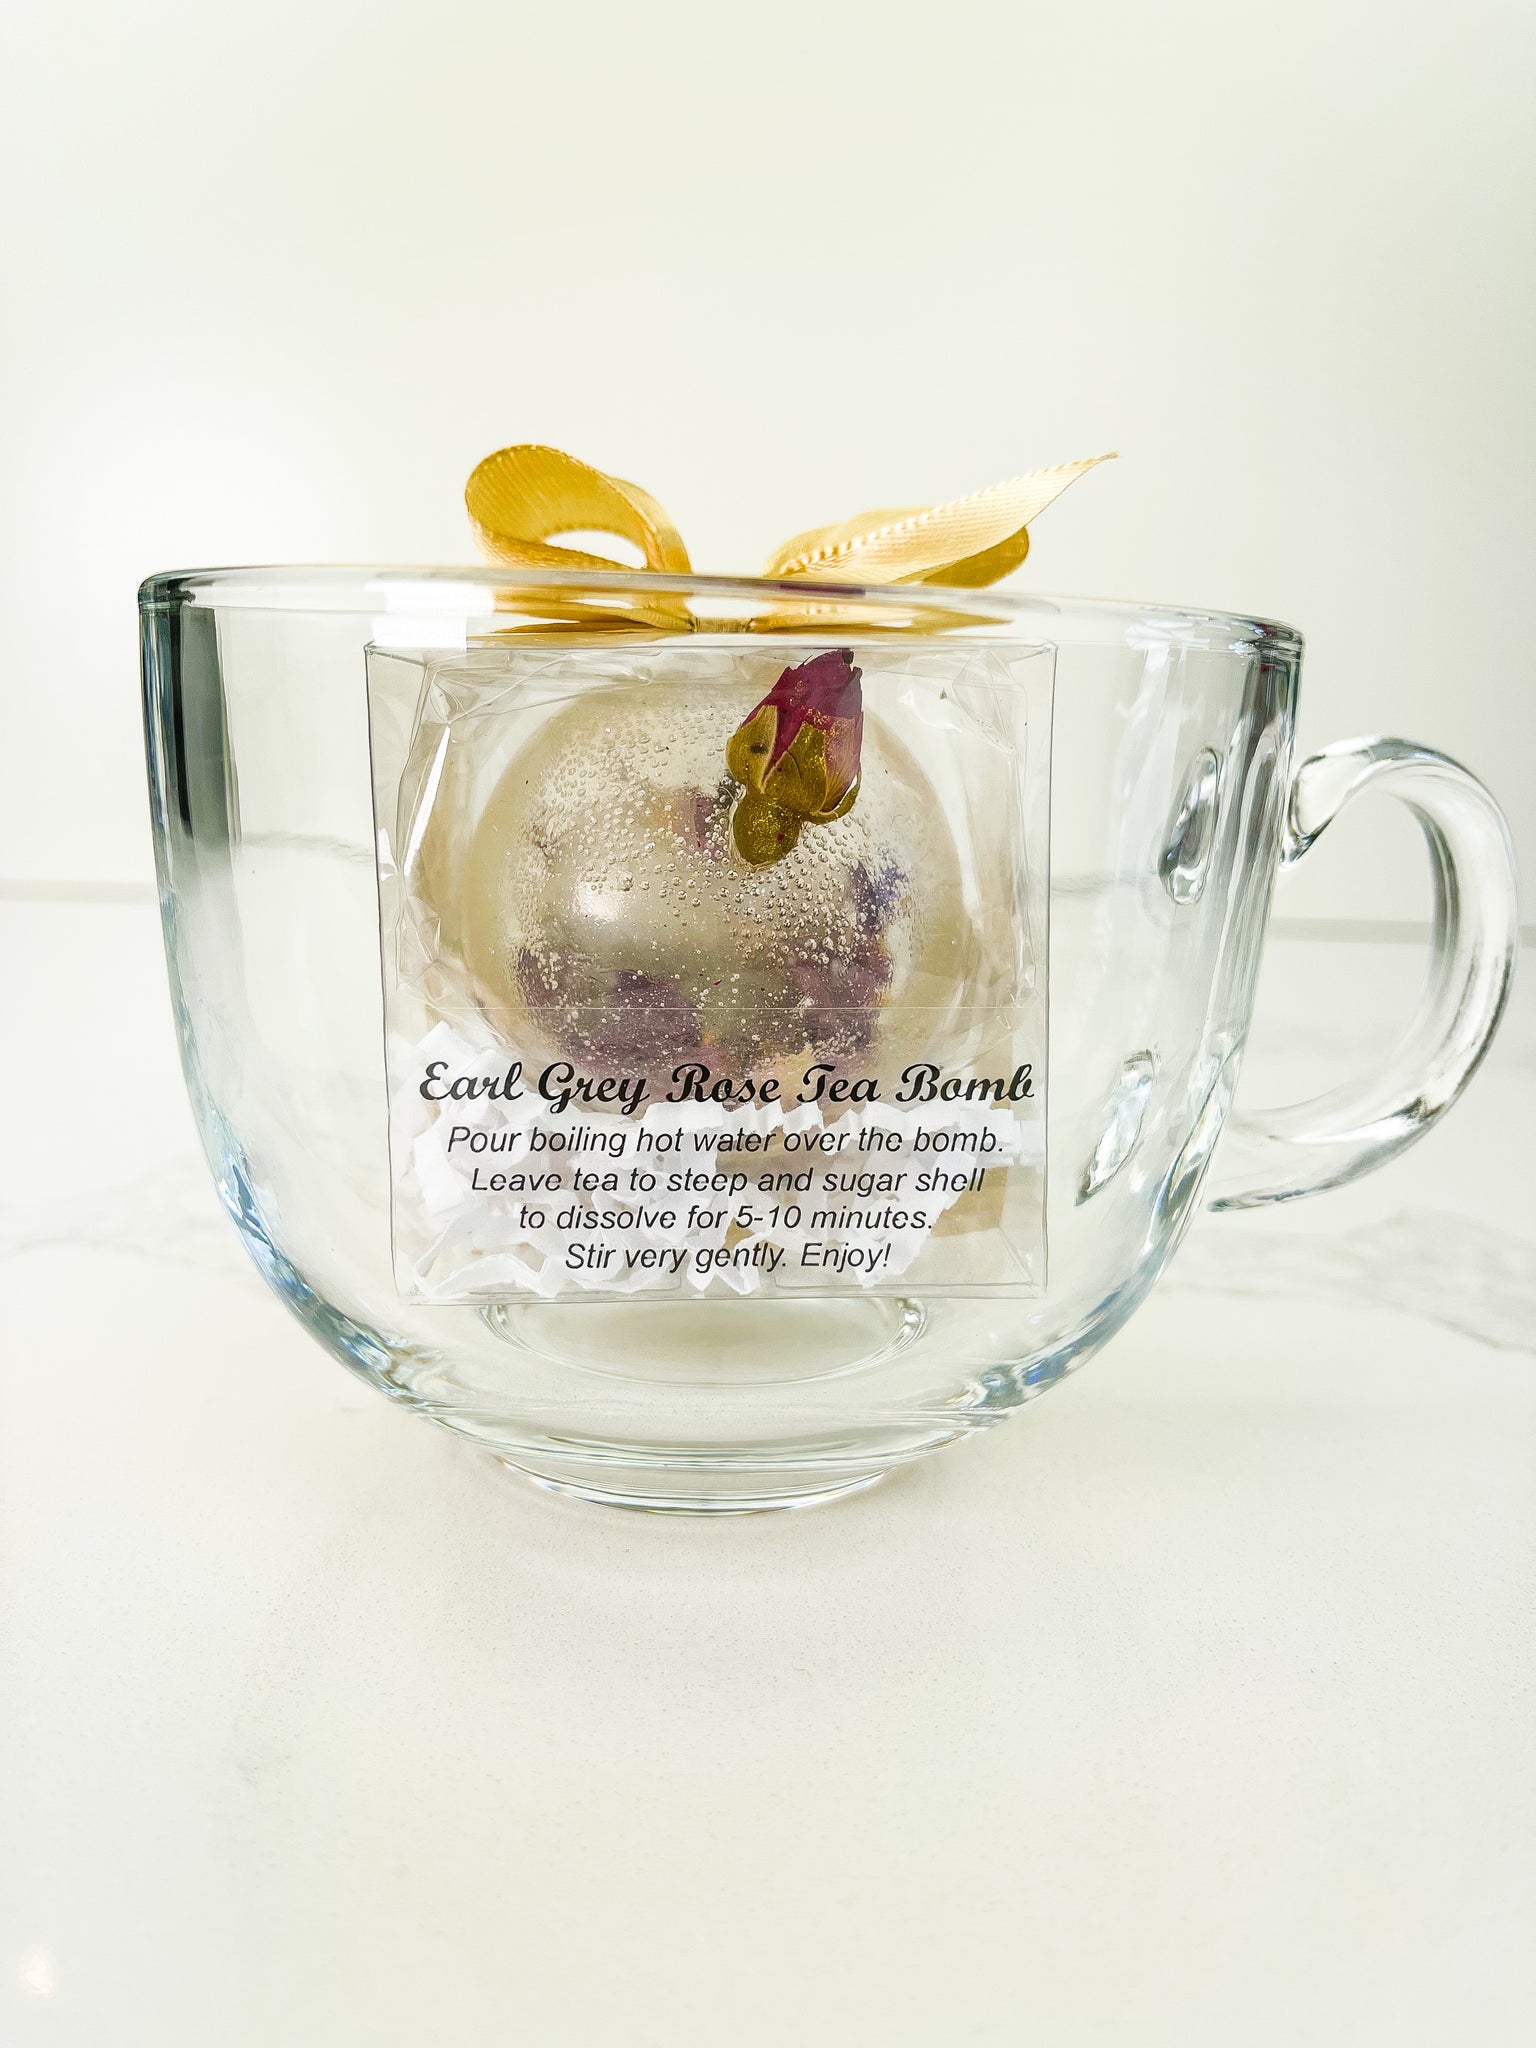 Cup and Tea Bomb Gift